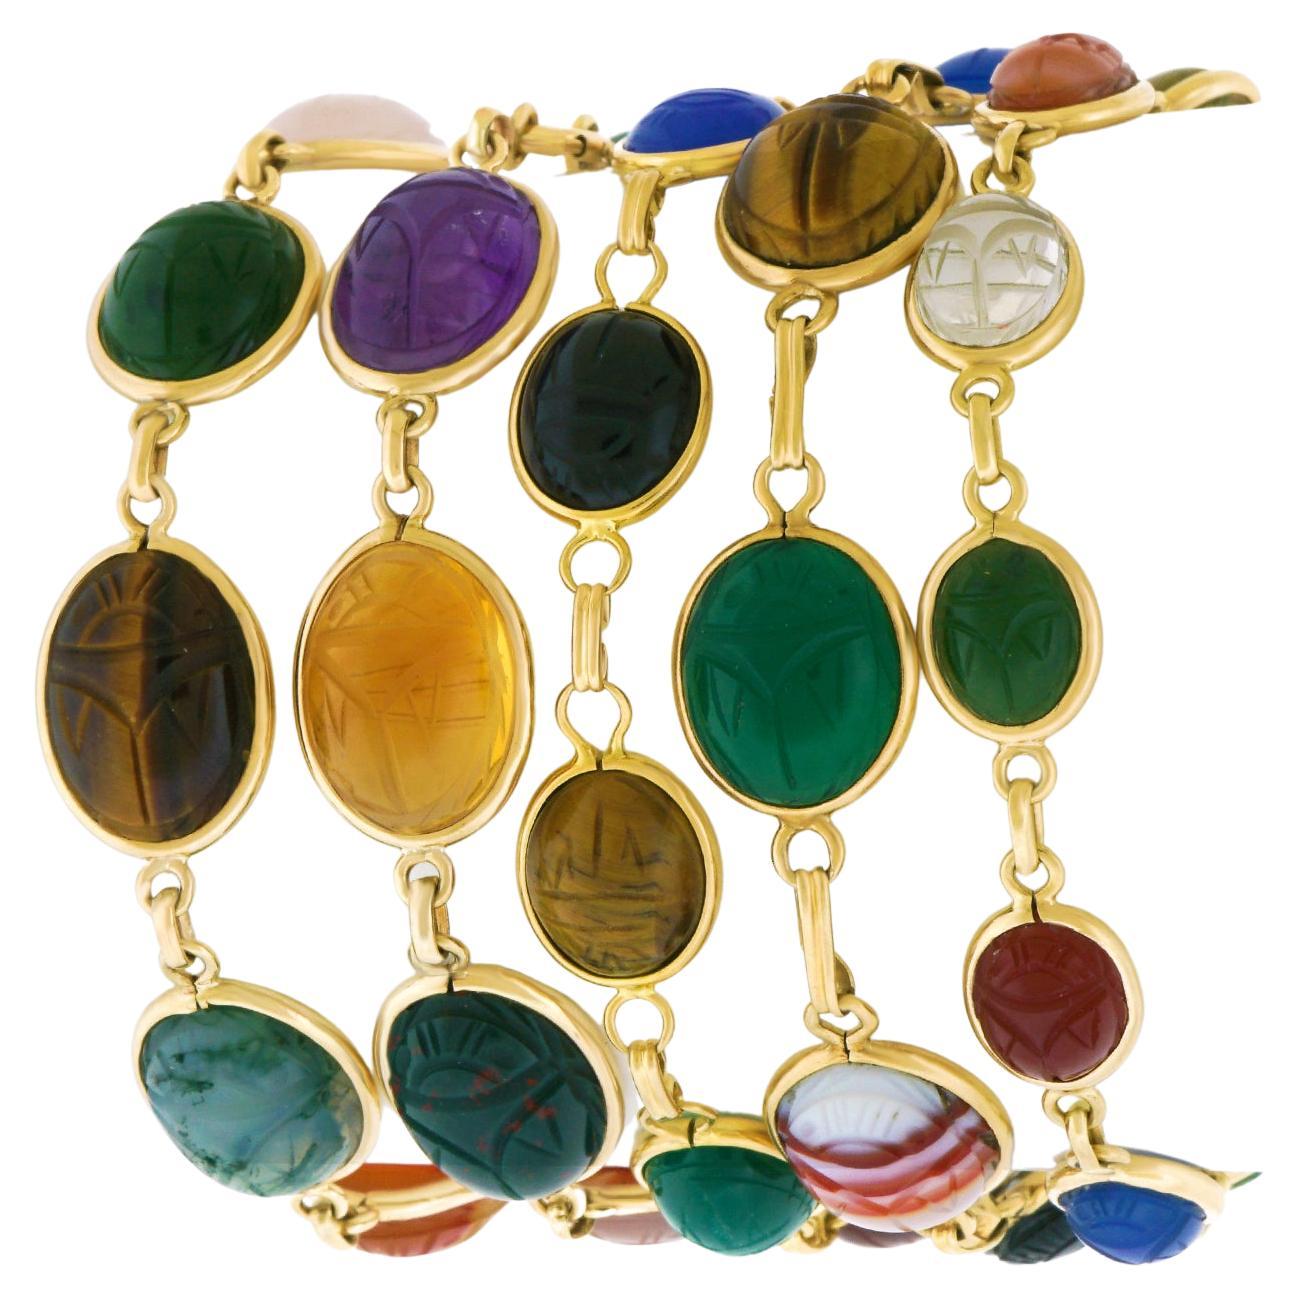 Vintage & Antique Agate Jewelry: Necklaces, Rings & More - For 